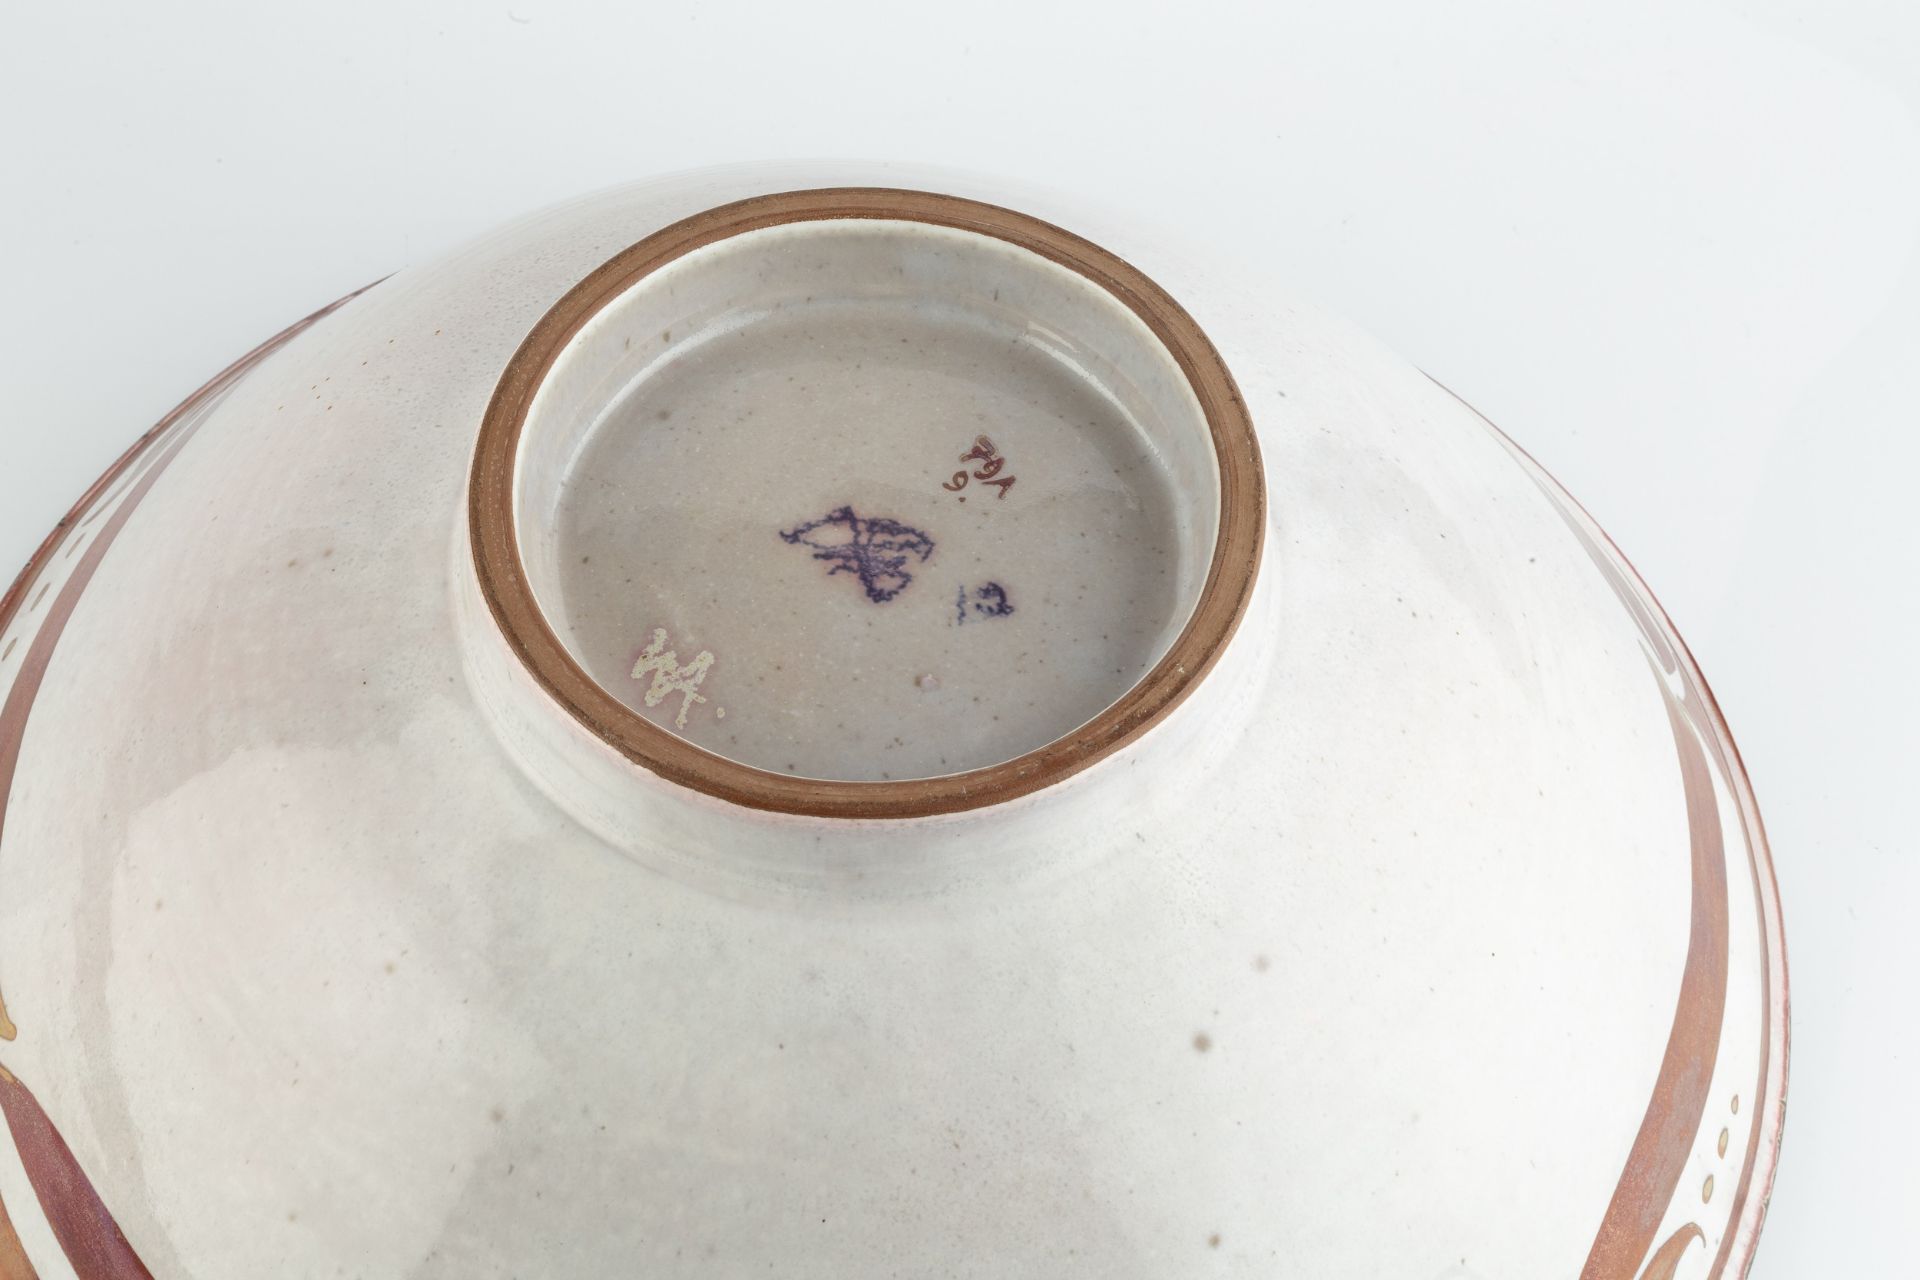 Alan Caiger-Smith (1930-2020) at Aldermaston Pottery Large footed bowl decorated in ruby and gold - Image 3 of 4